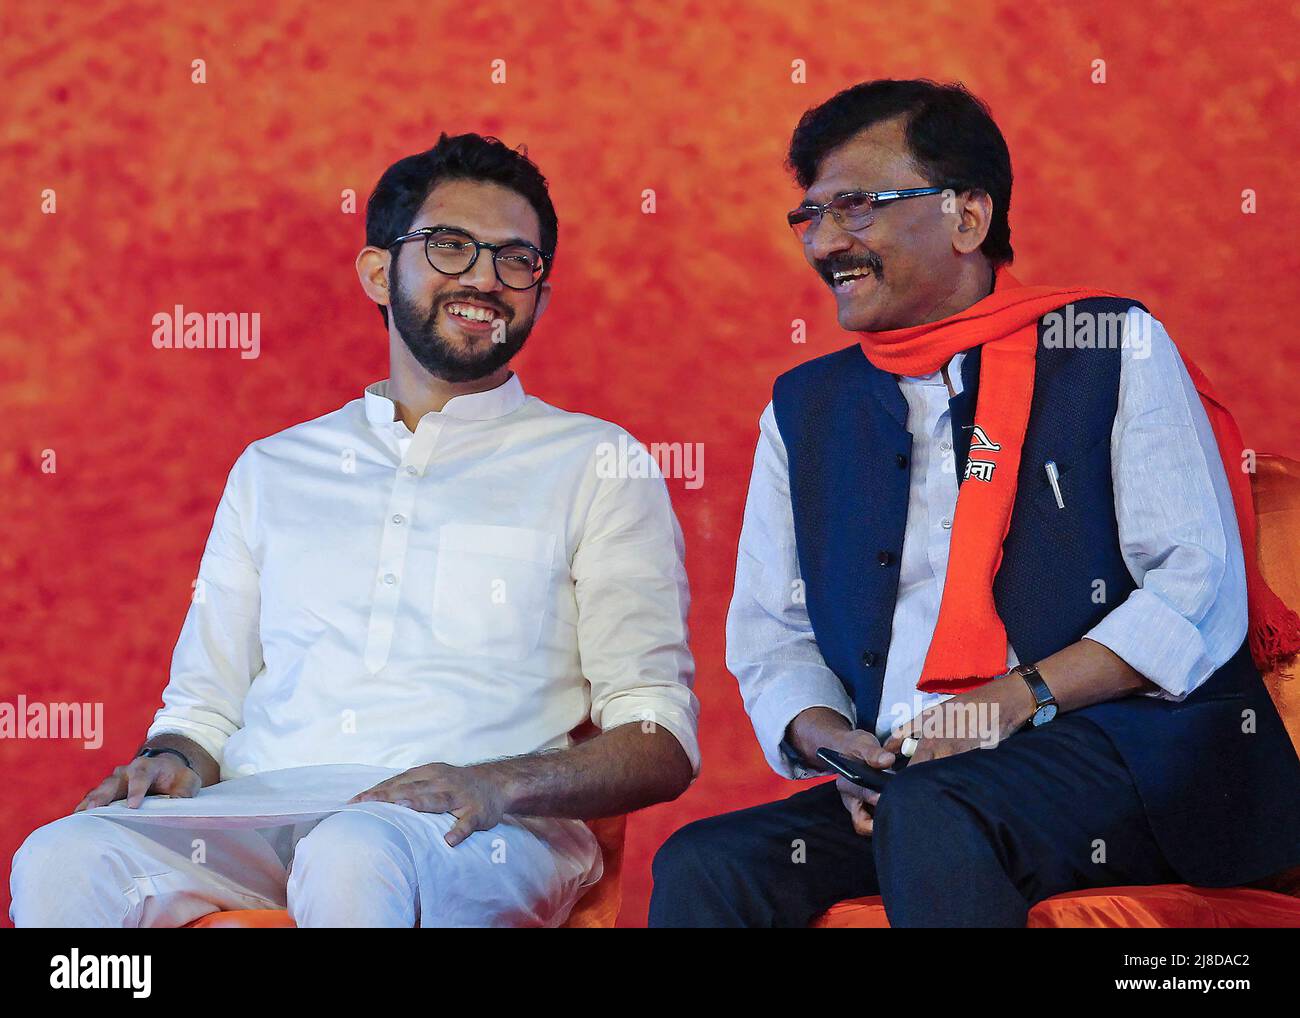 L-R Cabinet Minister of Tourism and Environment (Maharashtra), Aditya Thackeray and Sanjay Raut, Shiv Sena Member of Parliament (Maharashtra) share a laugh during the Shiv Sena rally. The rally marked the beginning of the party's second phase of 'Shiv Sampark Abhiyan' party's outreach programme with the voters and karyakartas (workers). (Photo by Ashish Vaishnav / SOPA Images/Sipa USA) Stock Photo